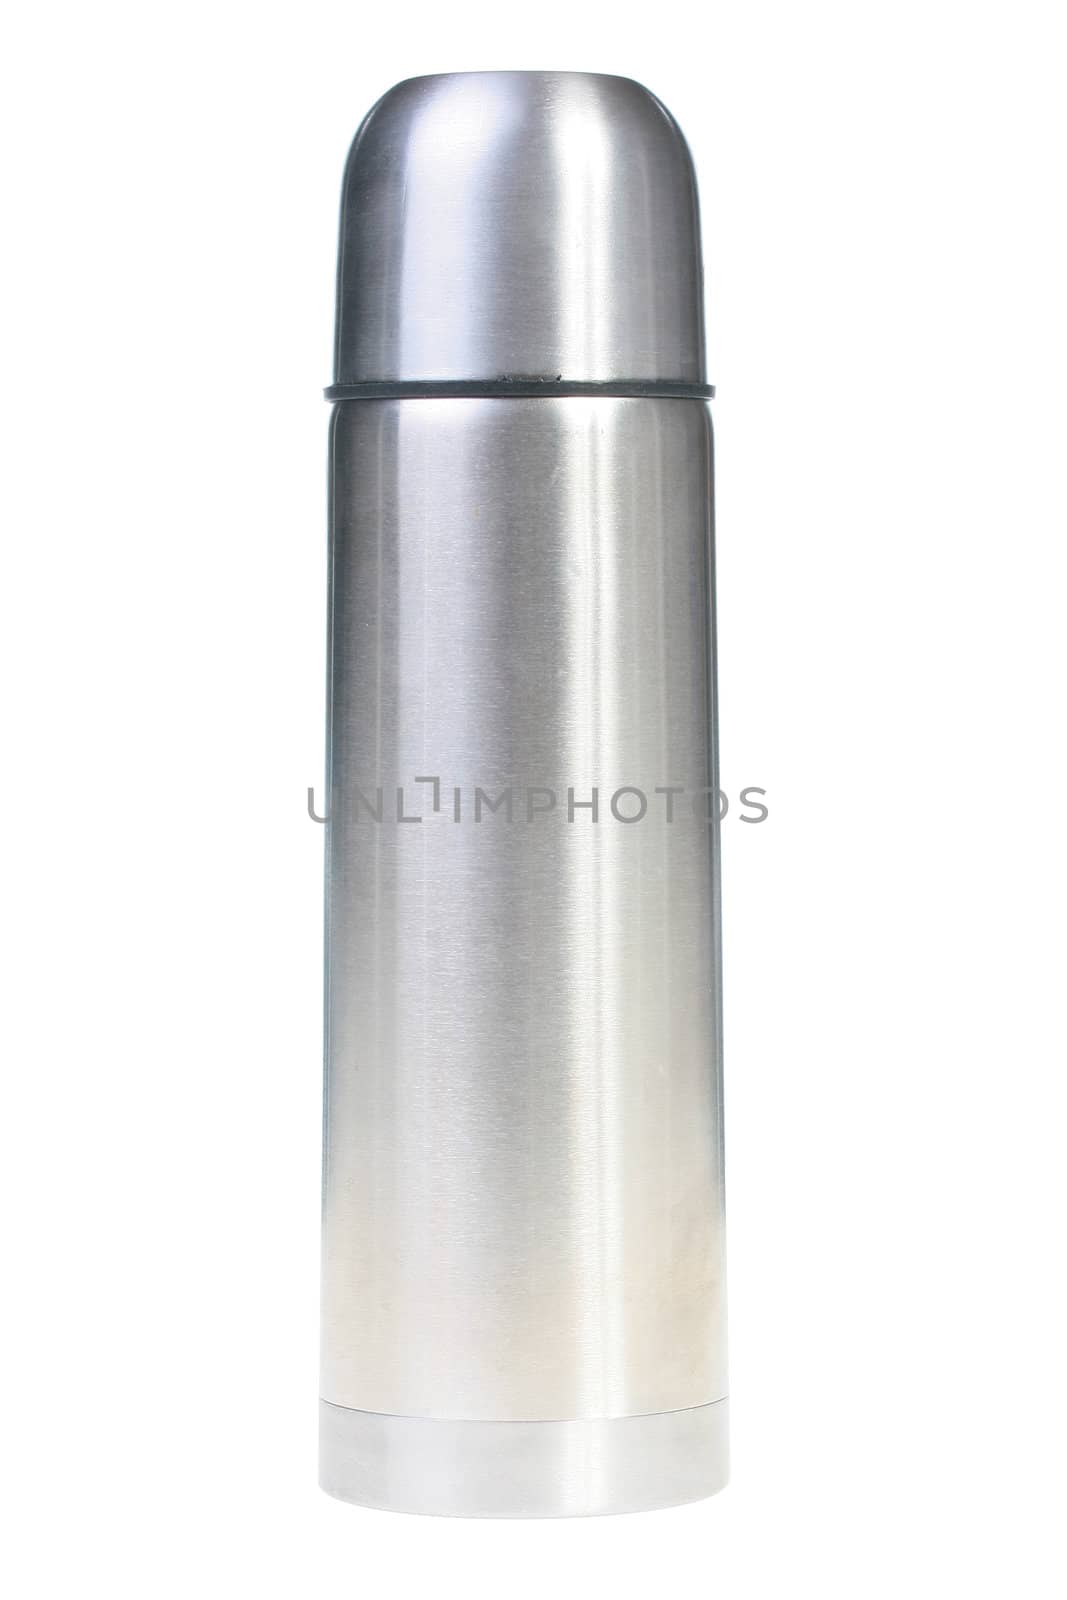 Metal thermos for preservation of a hot or cold liquid on a white background.